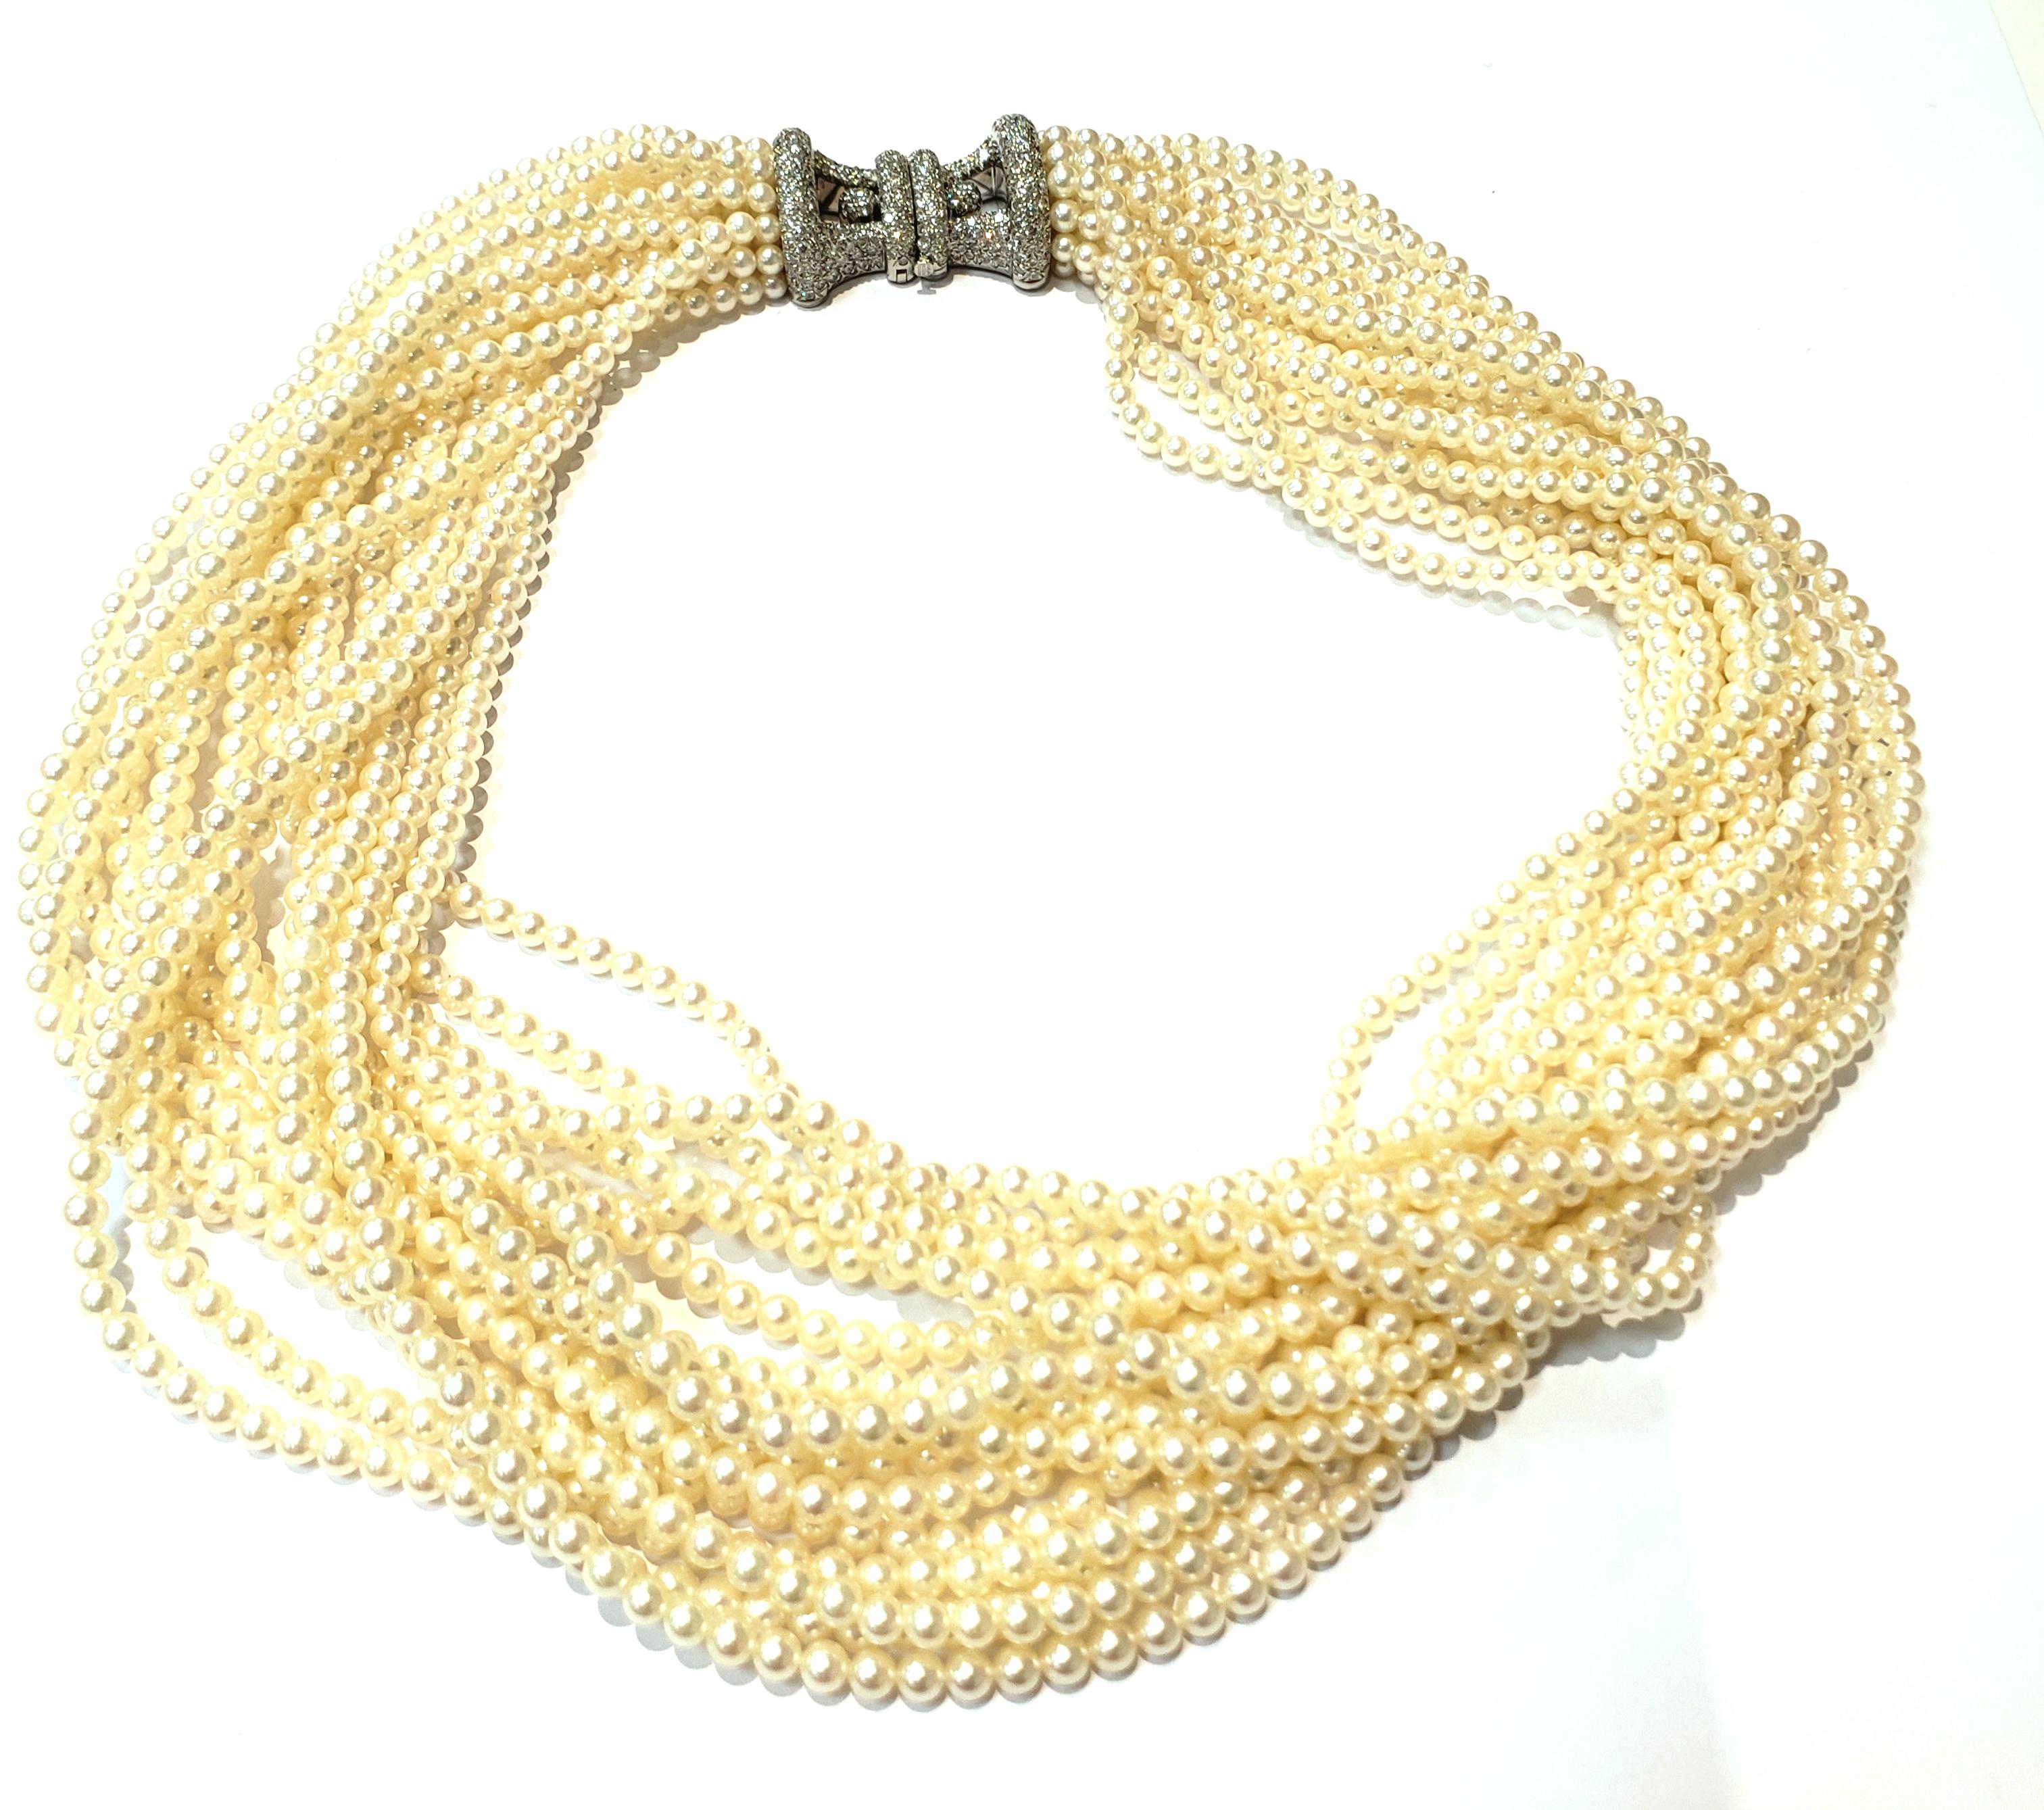 A Multi Strand Pearl Choker Necklace By Tiffany & Company, With A Pave Diamond Clasp, Set In Platinum.
Twelve Strands of 3.5 Millimeter Cultured Pearls. Clasp Has An Open Design & Is Fully Paved, With A Fold Over Safety Clasp.
Clasp Is Stamped